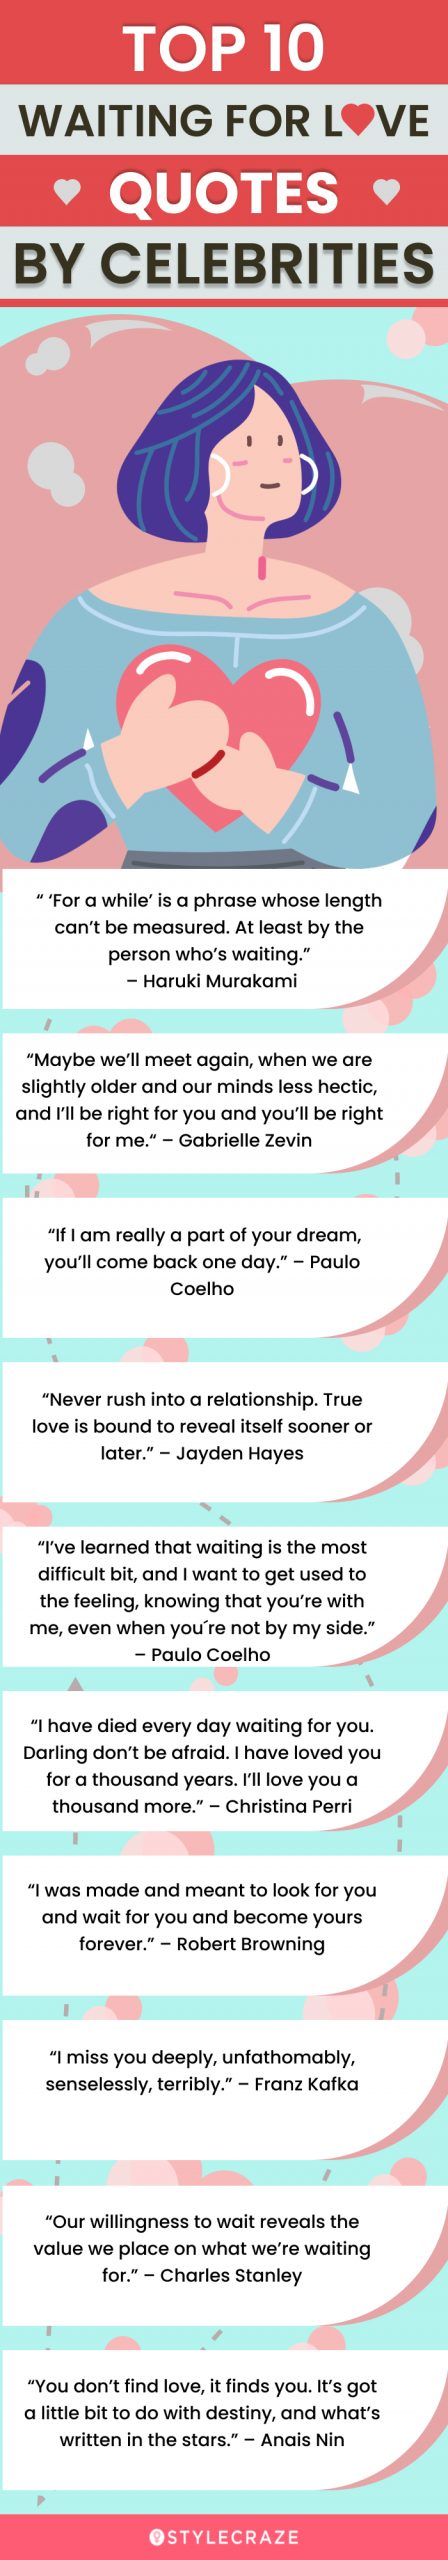 top 10 waiting for love quotes by celebrities(infographic)